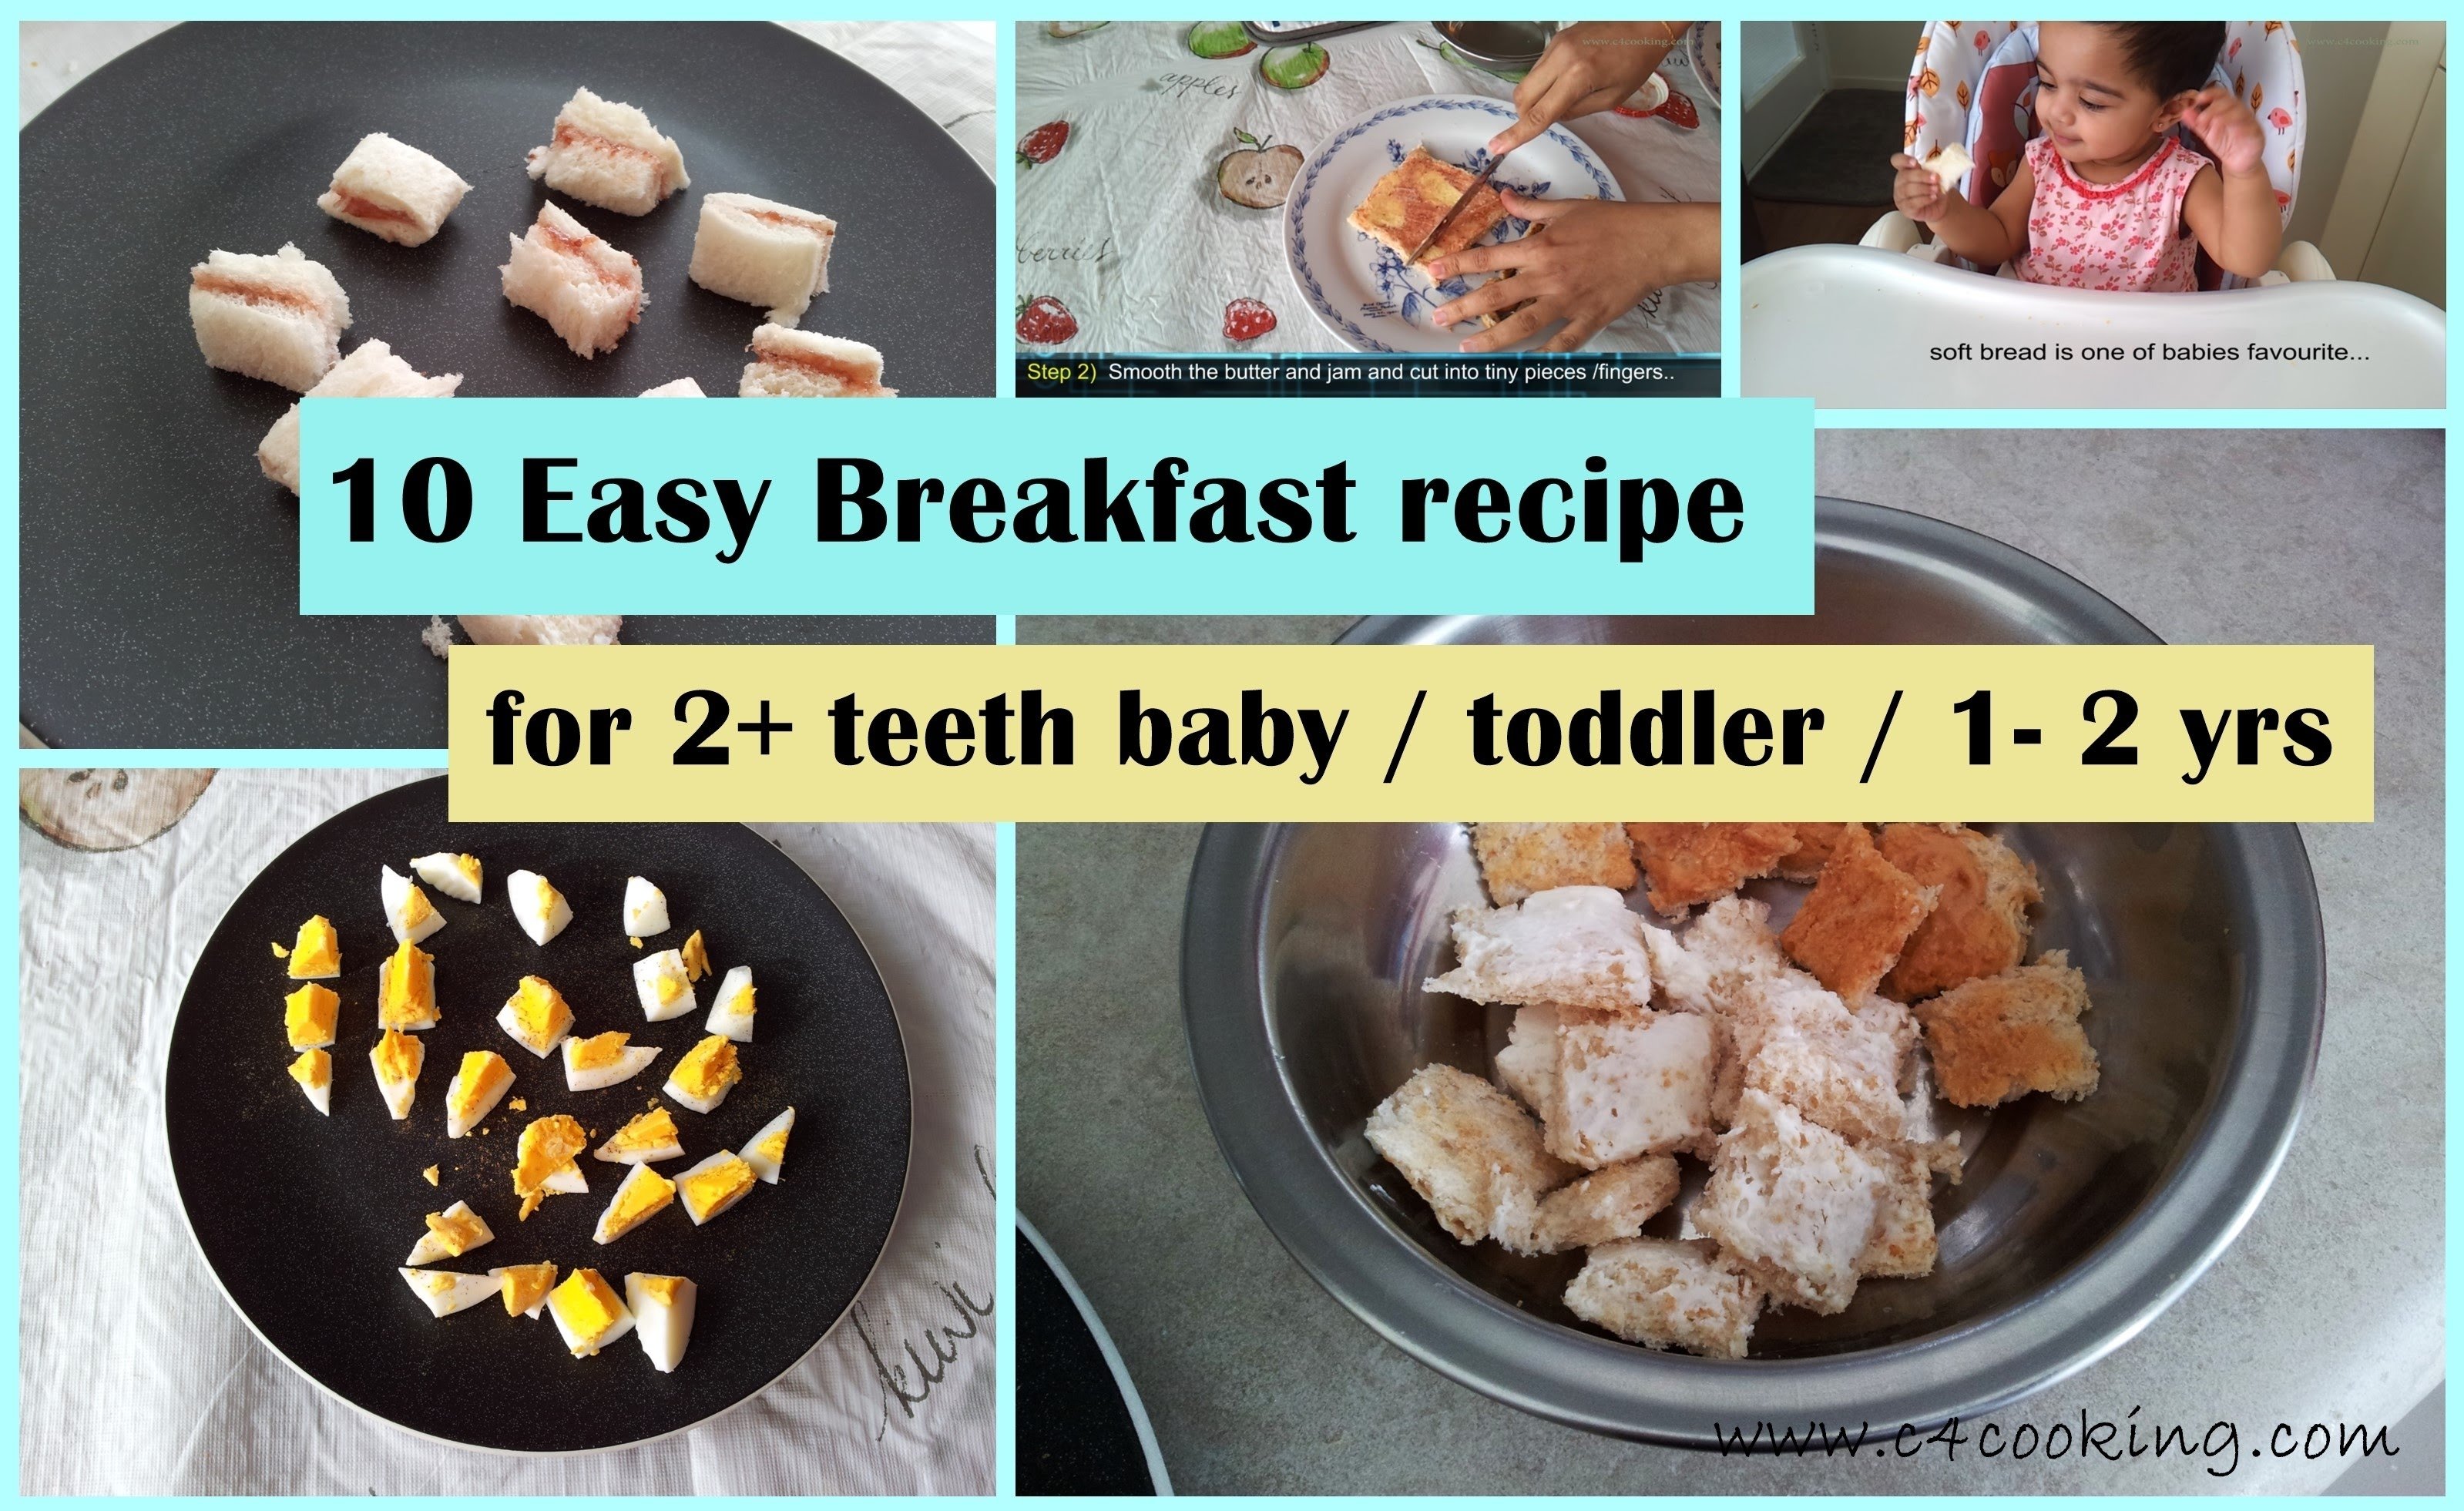 10 Attractive Food Ideas For 10 Month Old 10 easy breakfast ideas for 2 teeth baby toddler 1 2 yrs 1 2022